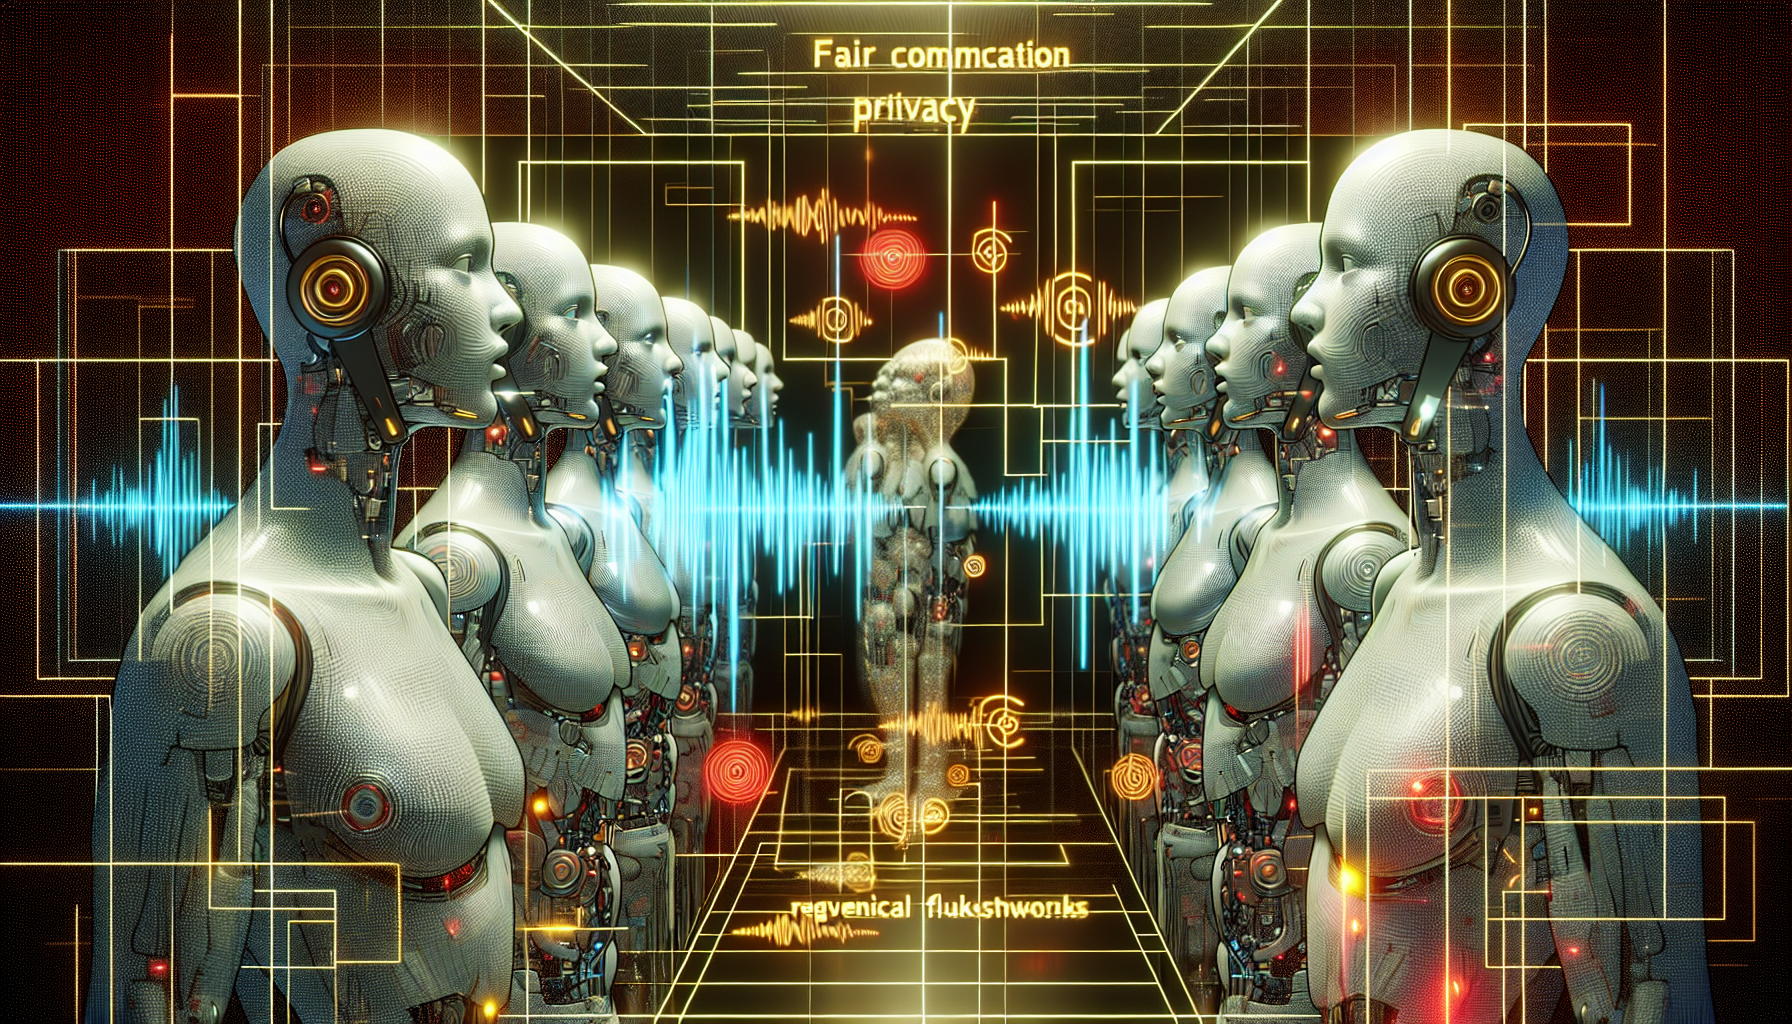 Futuristic representation of ethical considerations in AI voice cloning